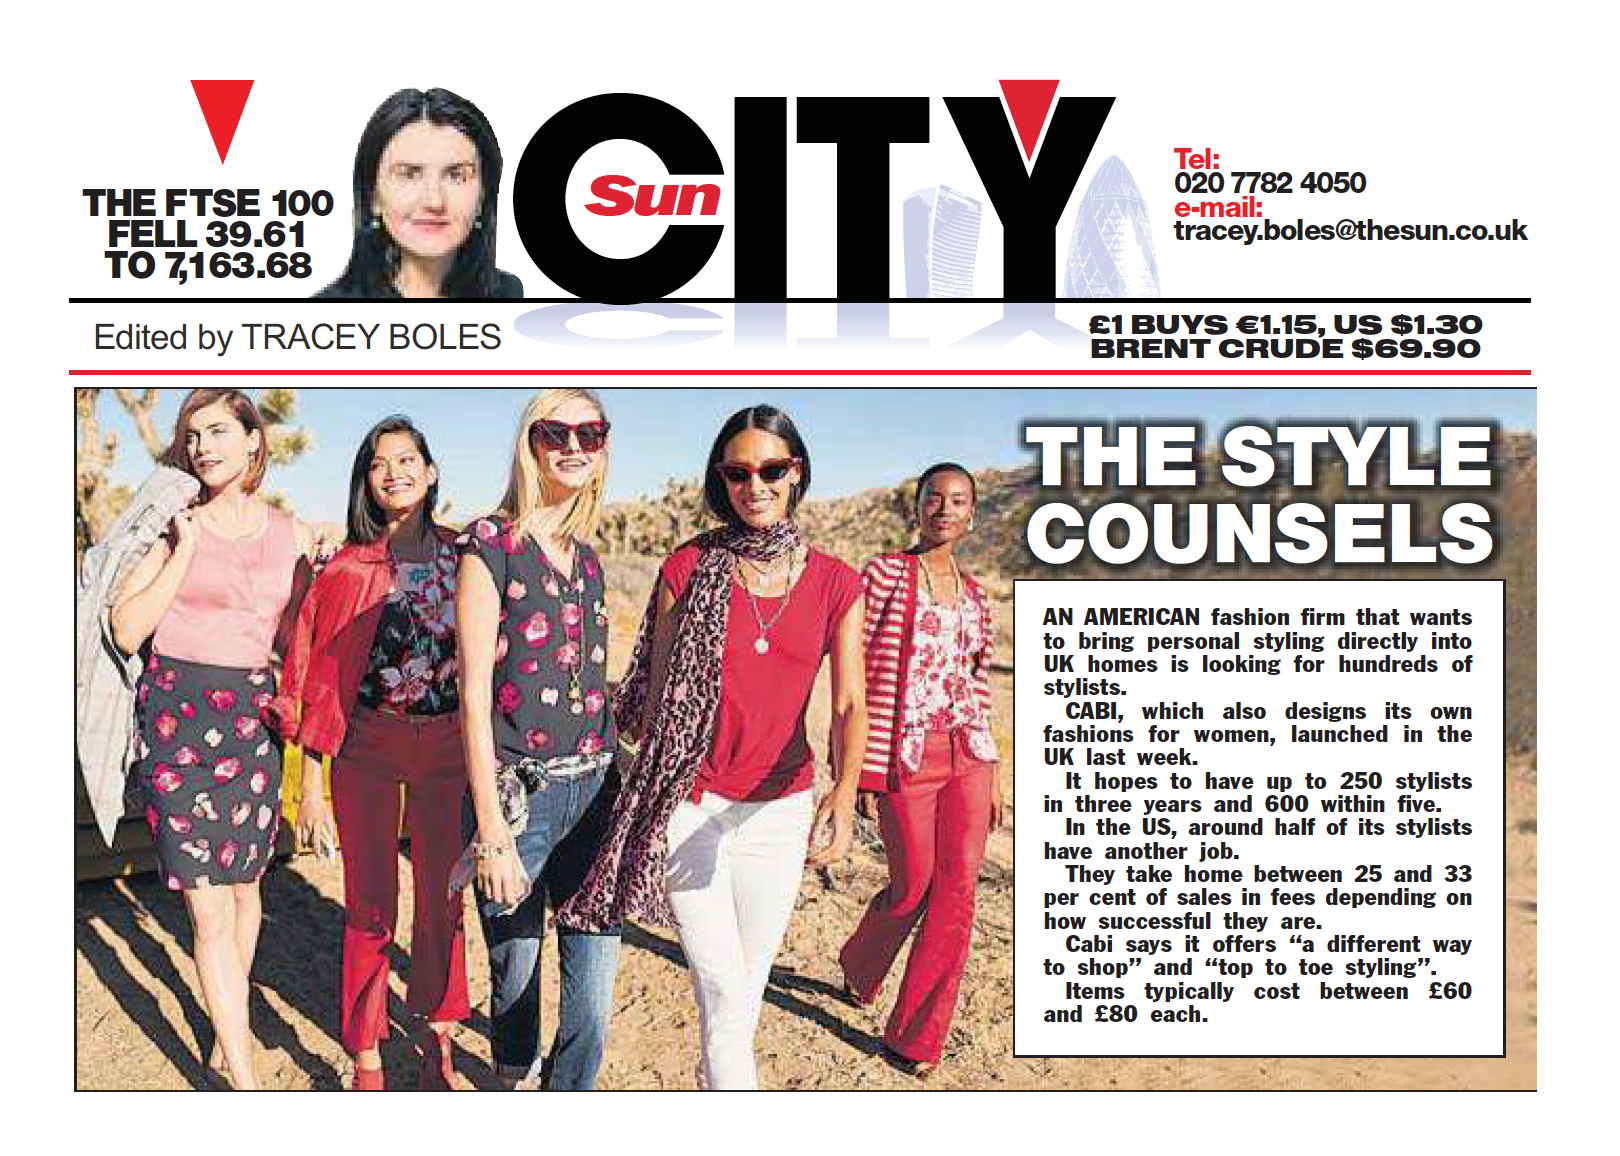 spotted on the sun: cabi offers a different way to shop